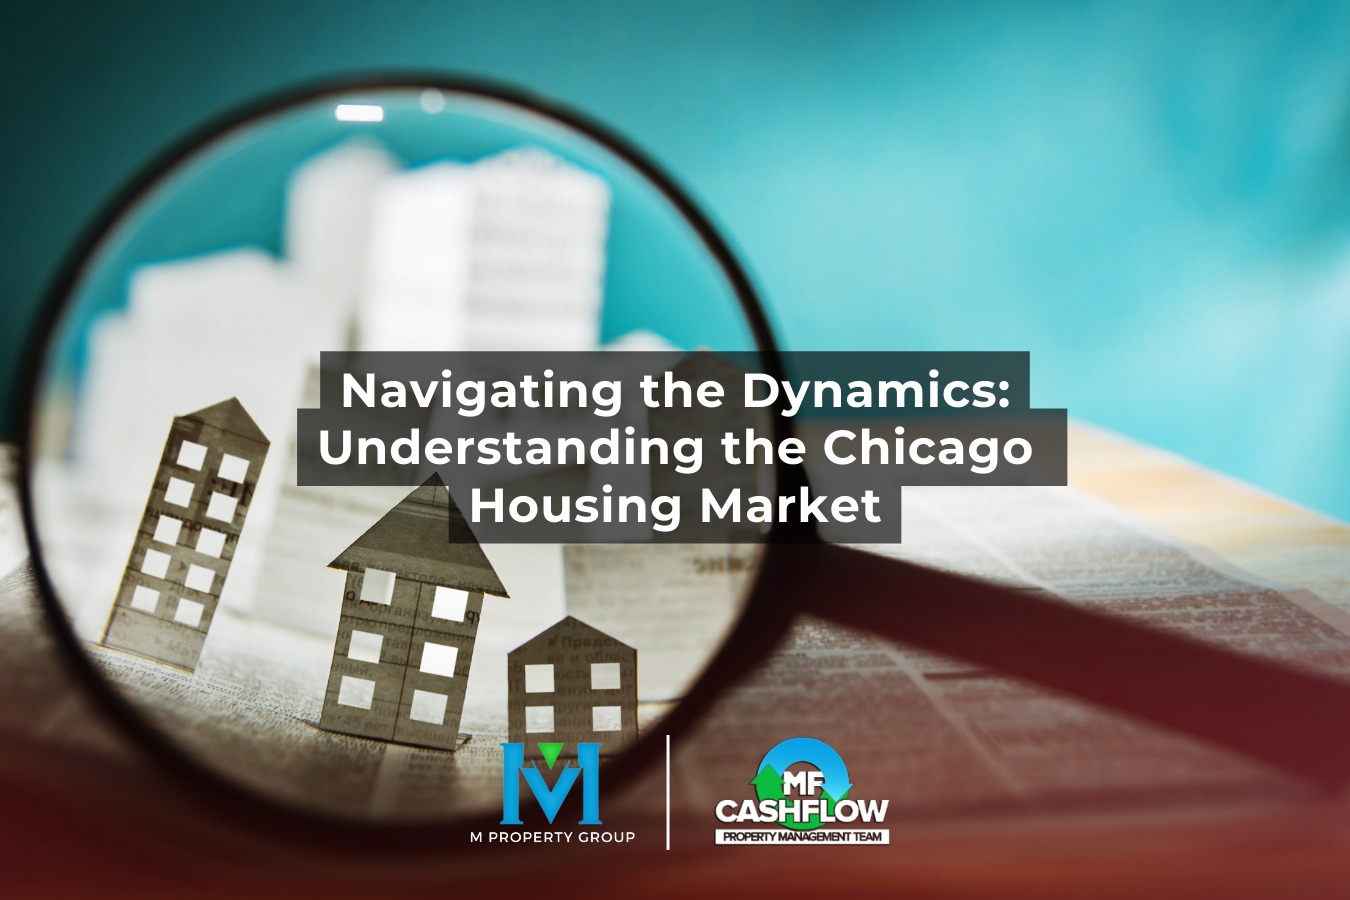 Navigating the Dynamics: Understanding the Chicago Housing Market